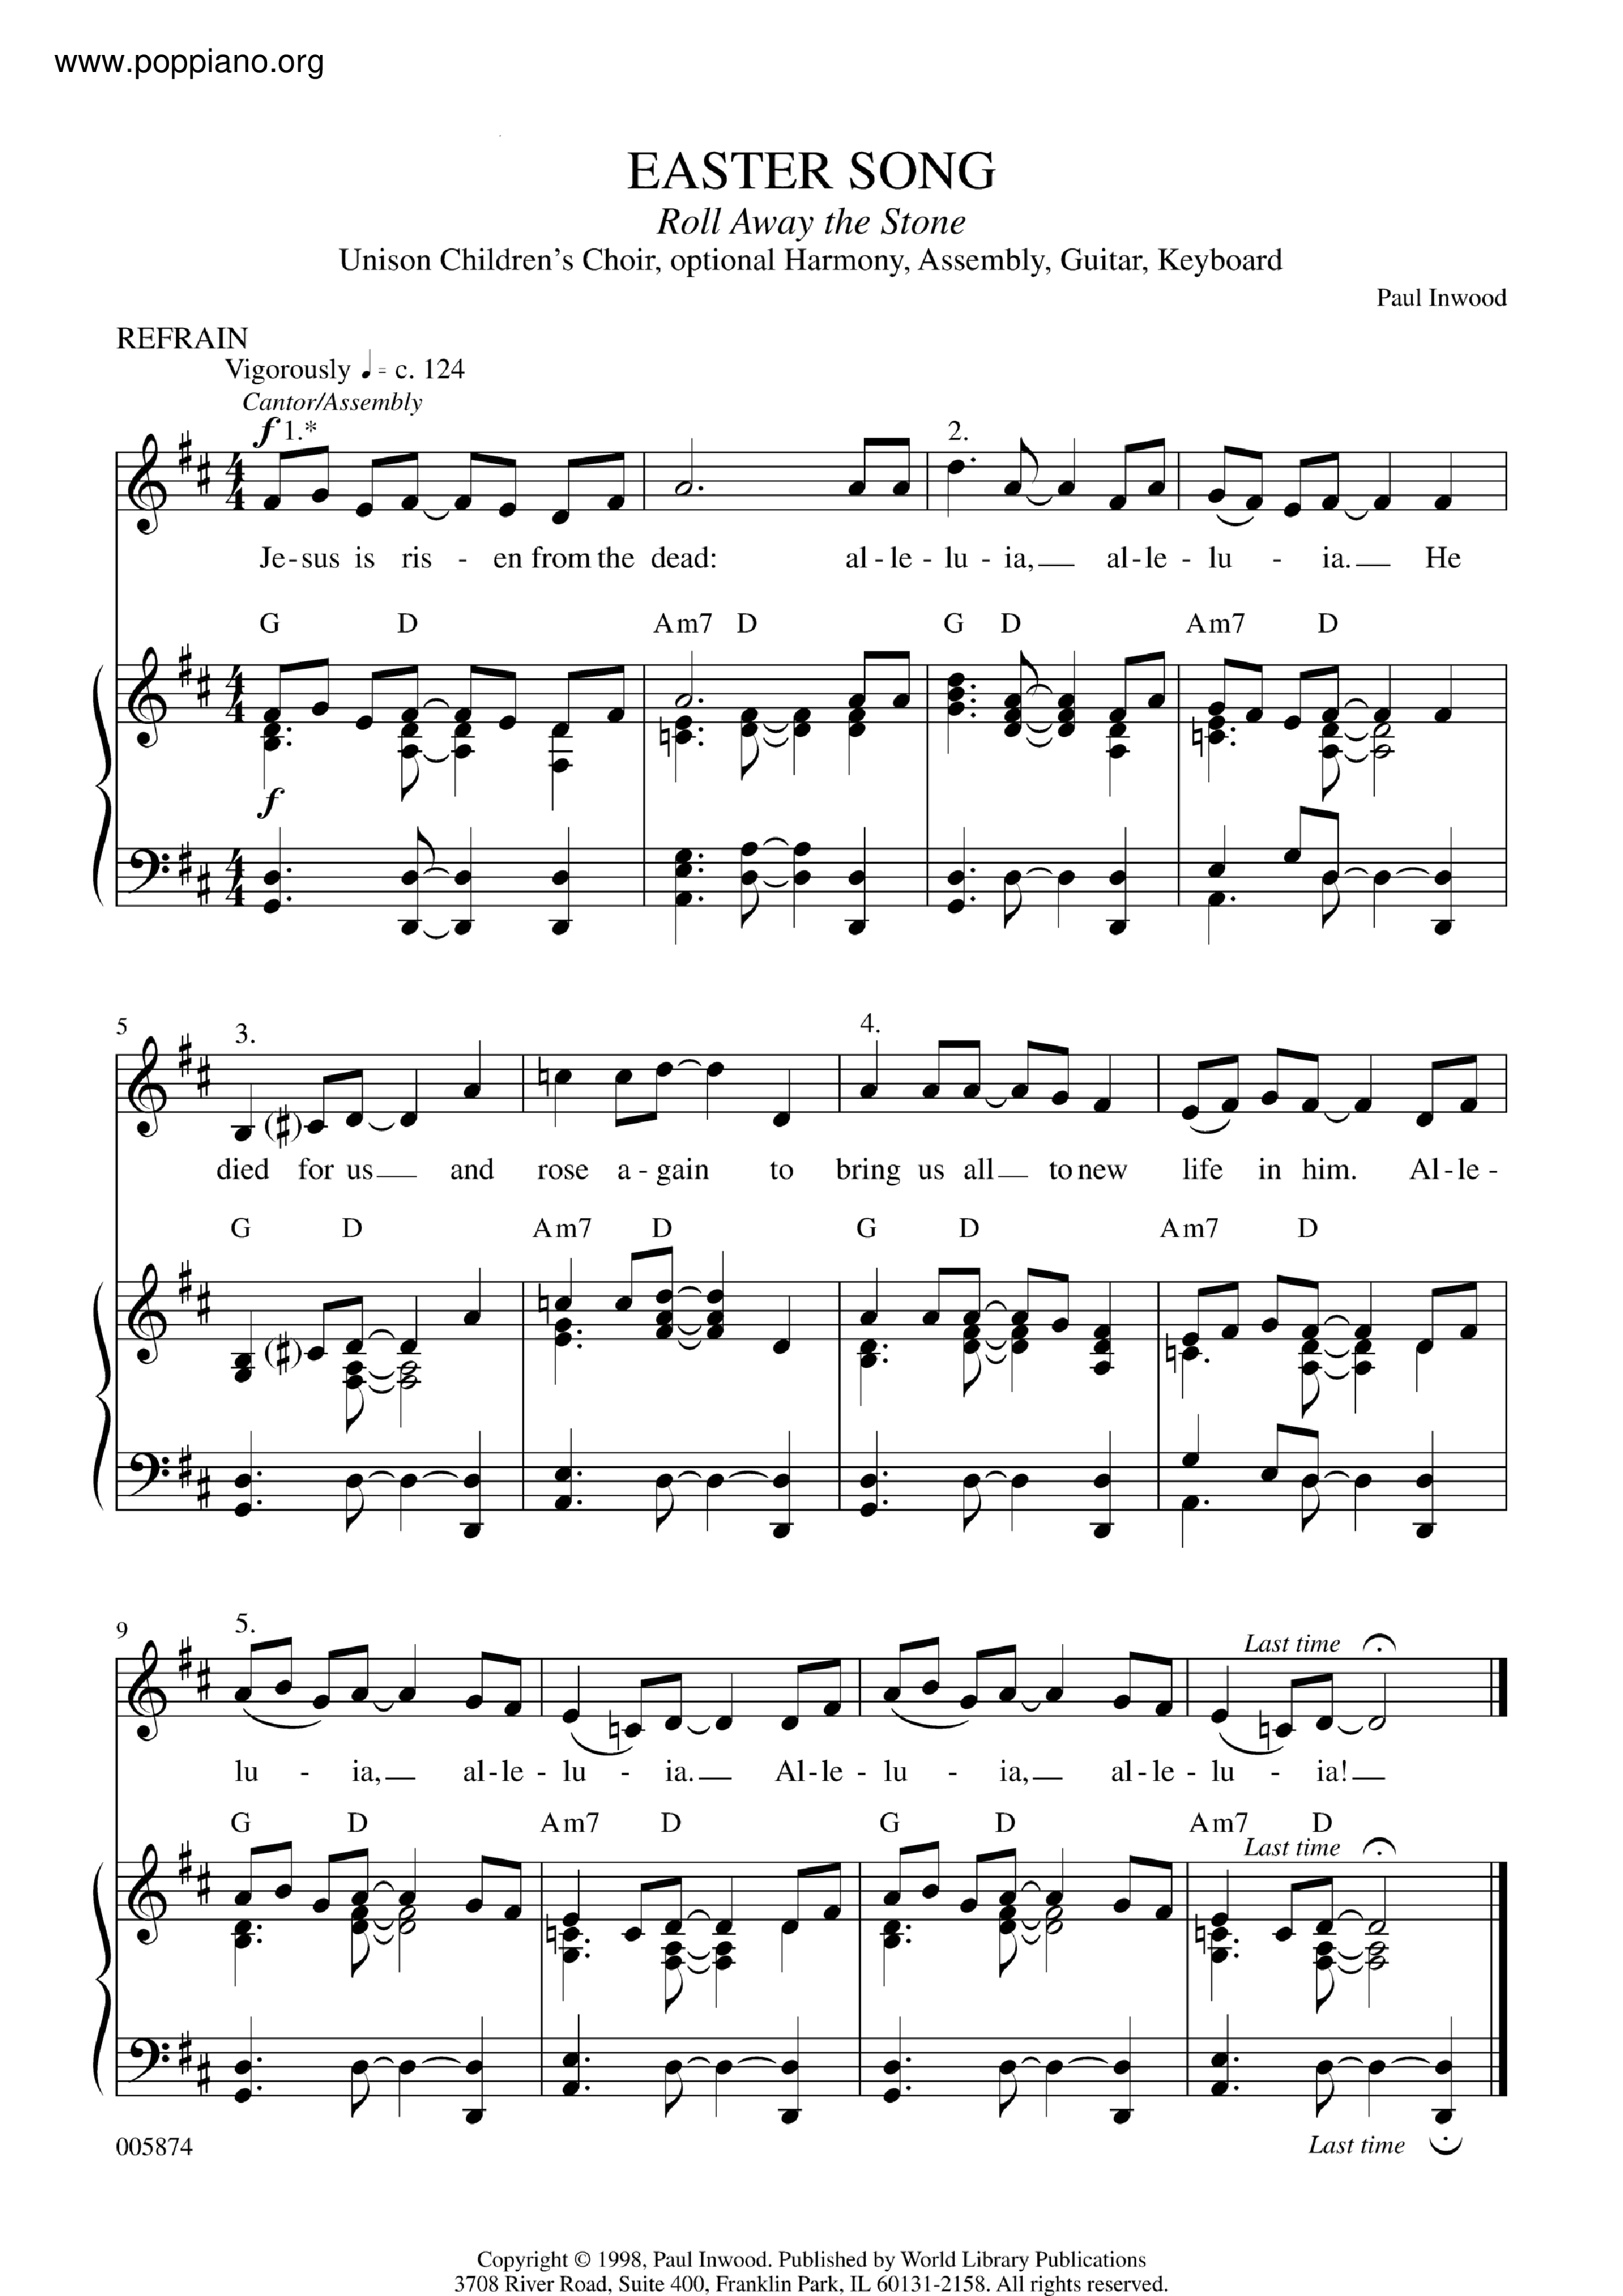 Easter Song (Roll Away The Stone) Score